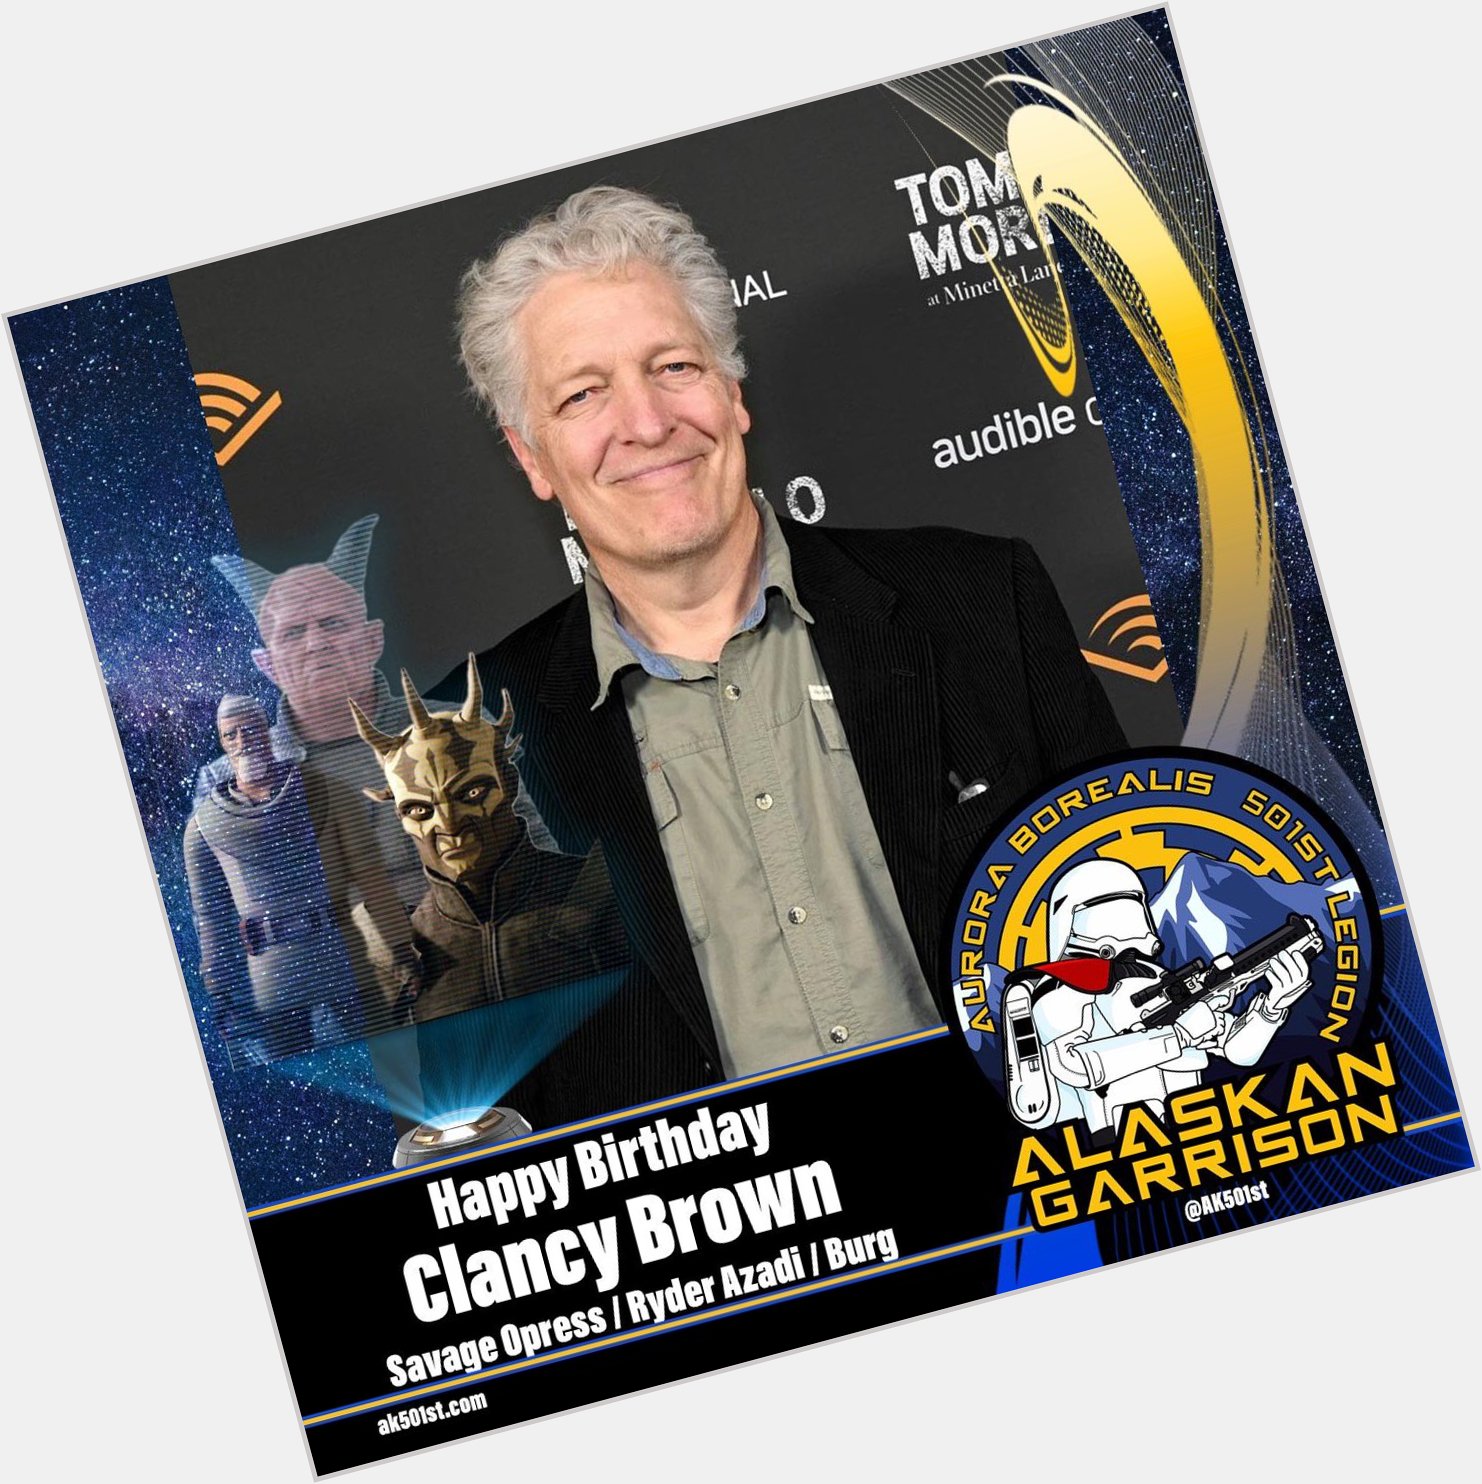 The Alaskan Garrison would like to wish Clancy Brown a very happy birthday!   